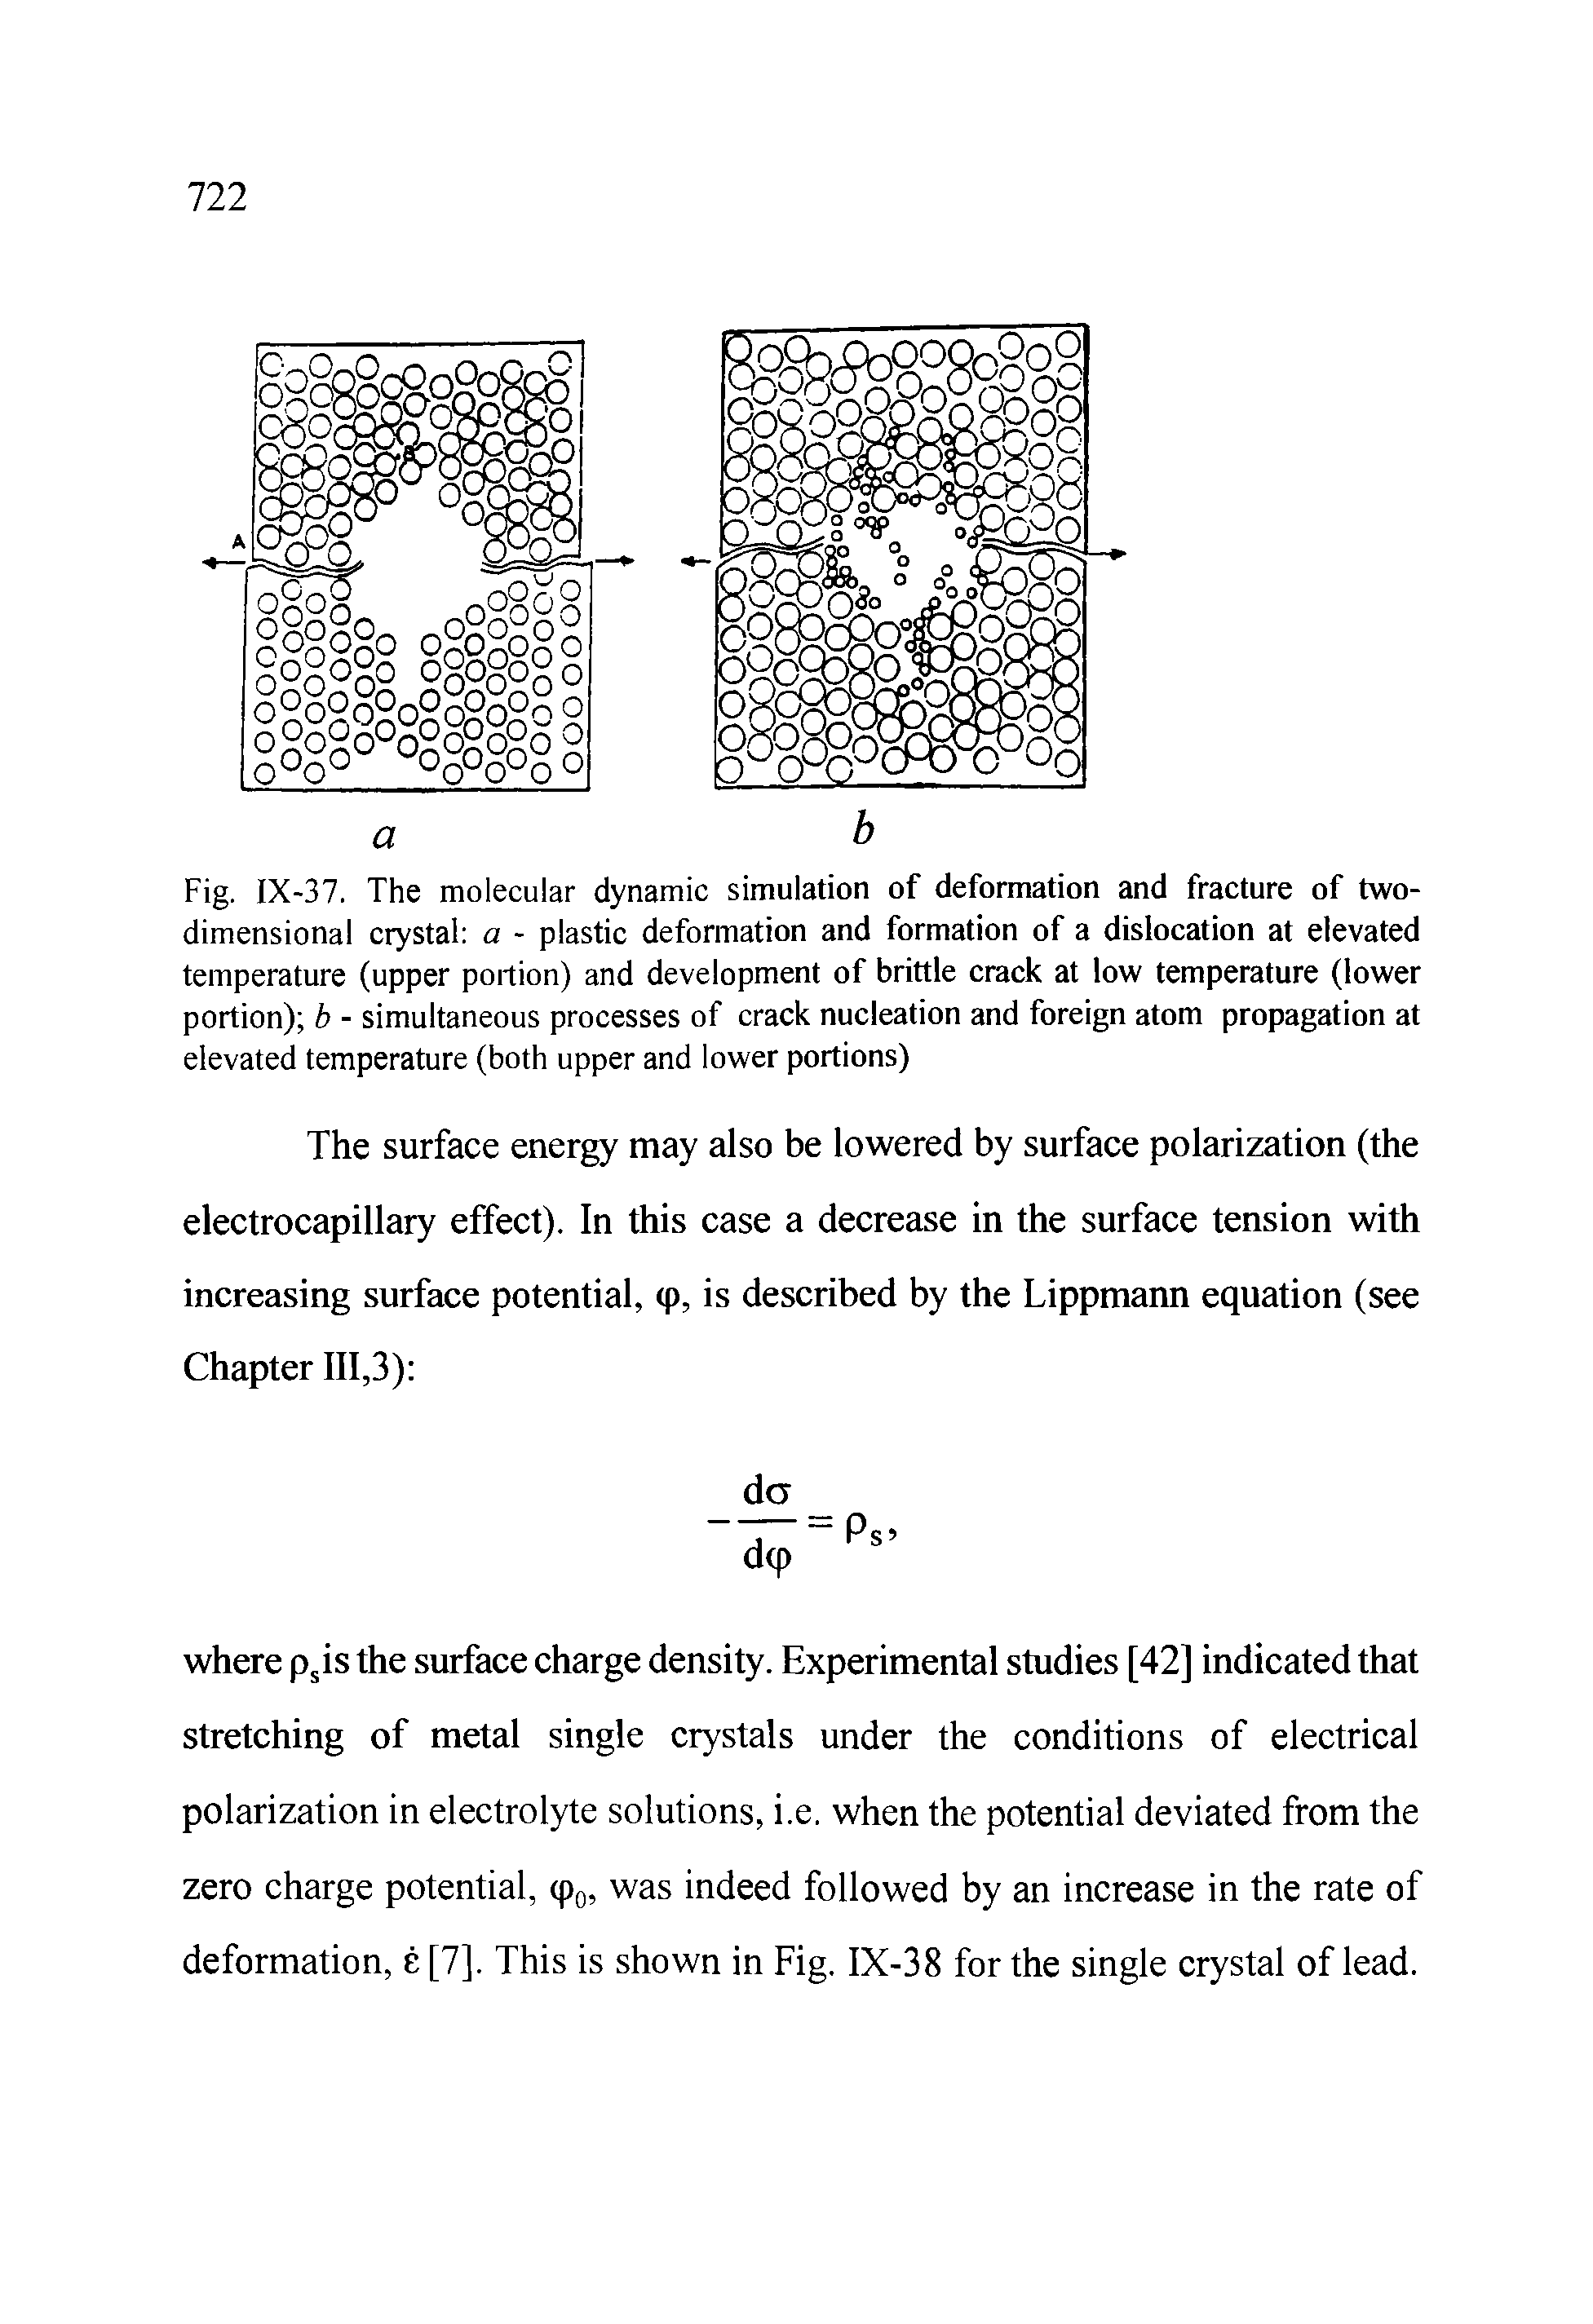 Fig. IX-37. The molecular dynamic simulation of deformation and fracture of two-dimensional crystal a - plastic deformation and formation of a dislocation at elevated temperature (upper portion) and development of brittle crack at low temperature (lower portion) b - simultaneous processes of crack nucleation and foreign atom propagation at elevated temperature (both upper and lower portions)...